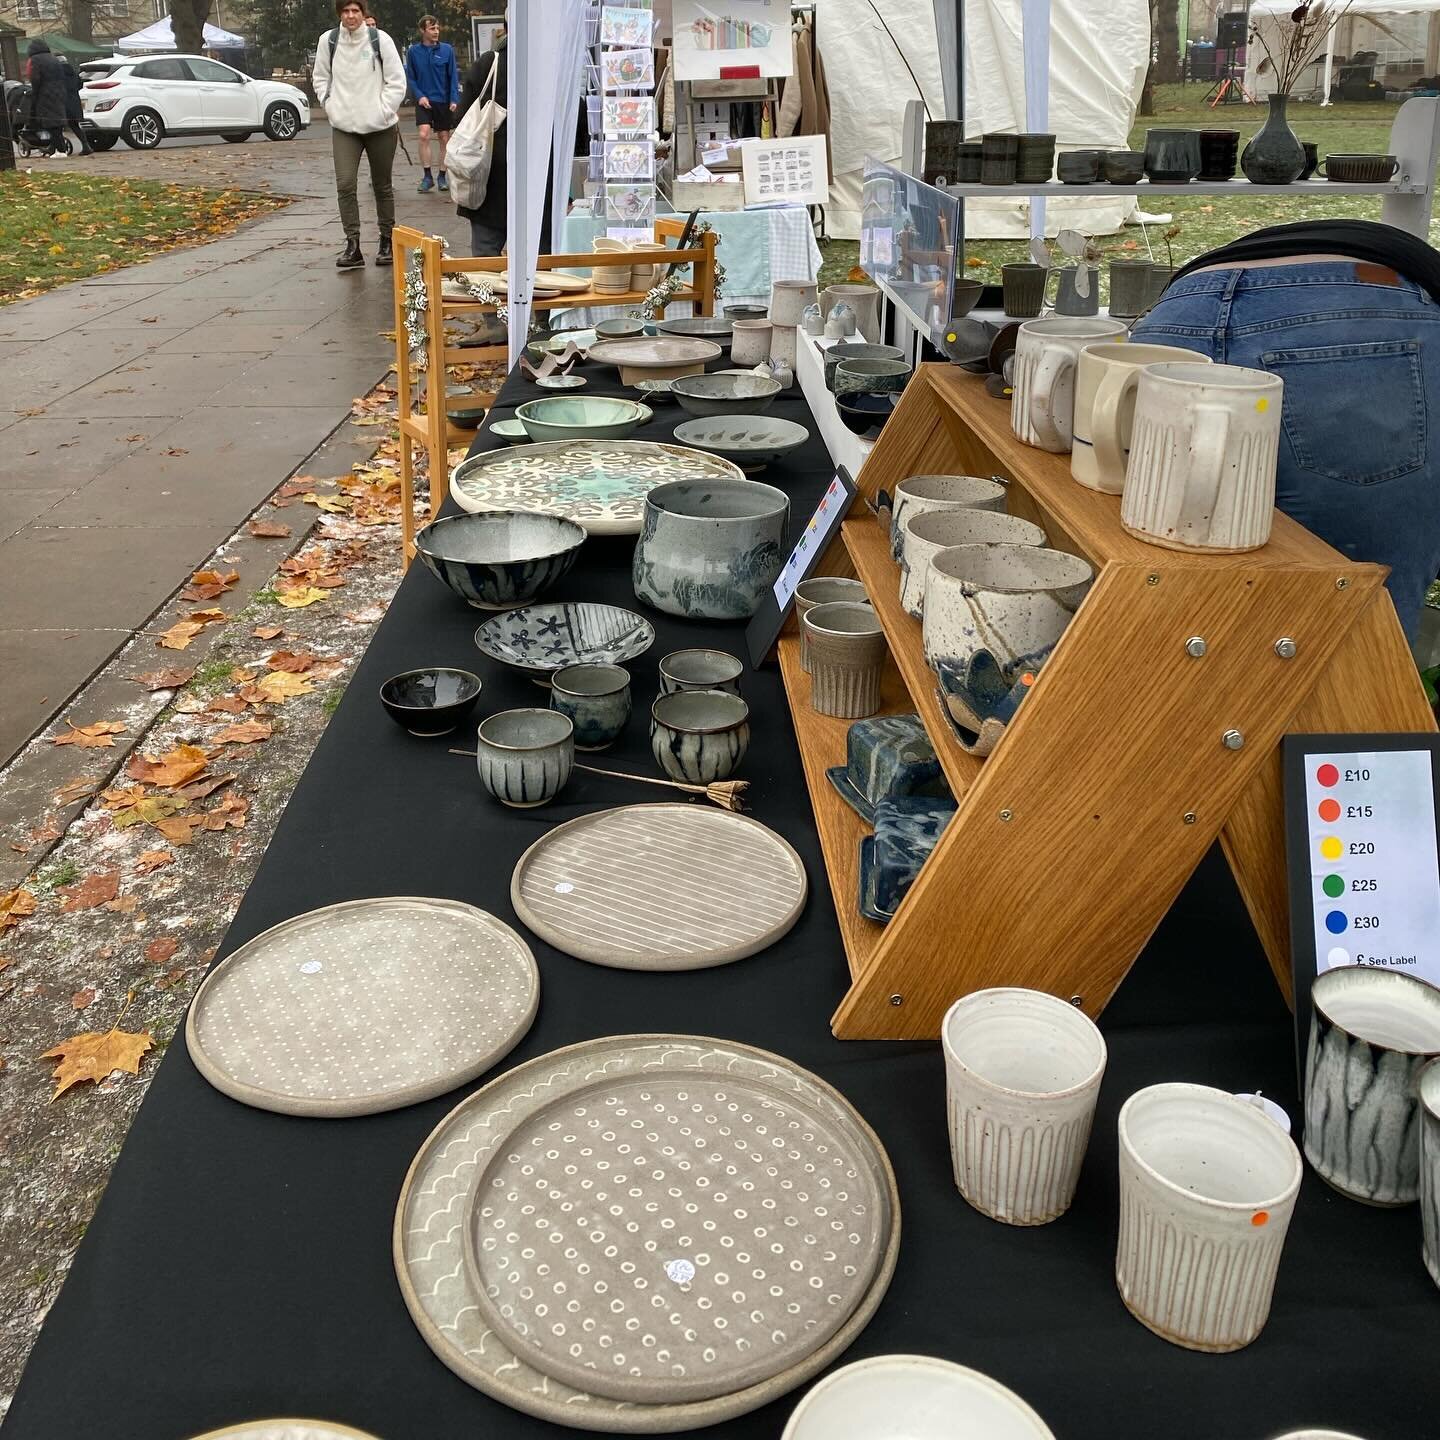 Wonderful day at our stall in @millroadwinterfair with @pottering_a_round  @katespenceceramics @nathalielbceramics 

We had an awesome time, met old and new friends and sold lots of ceramics. It was a pleasure to see people looking out for our collec